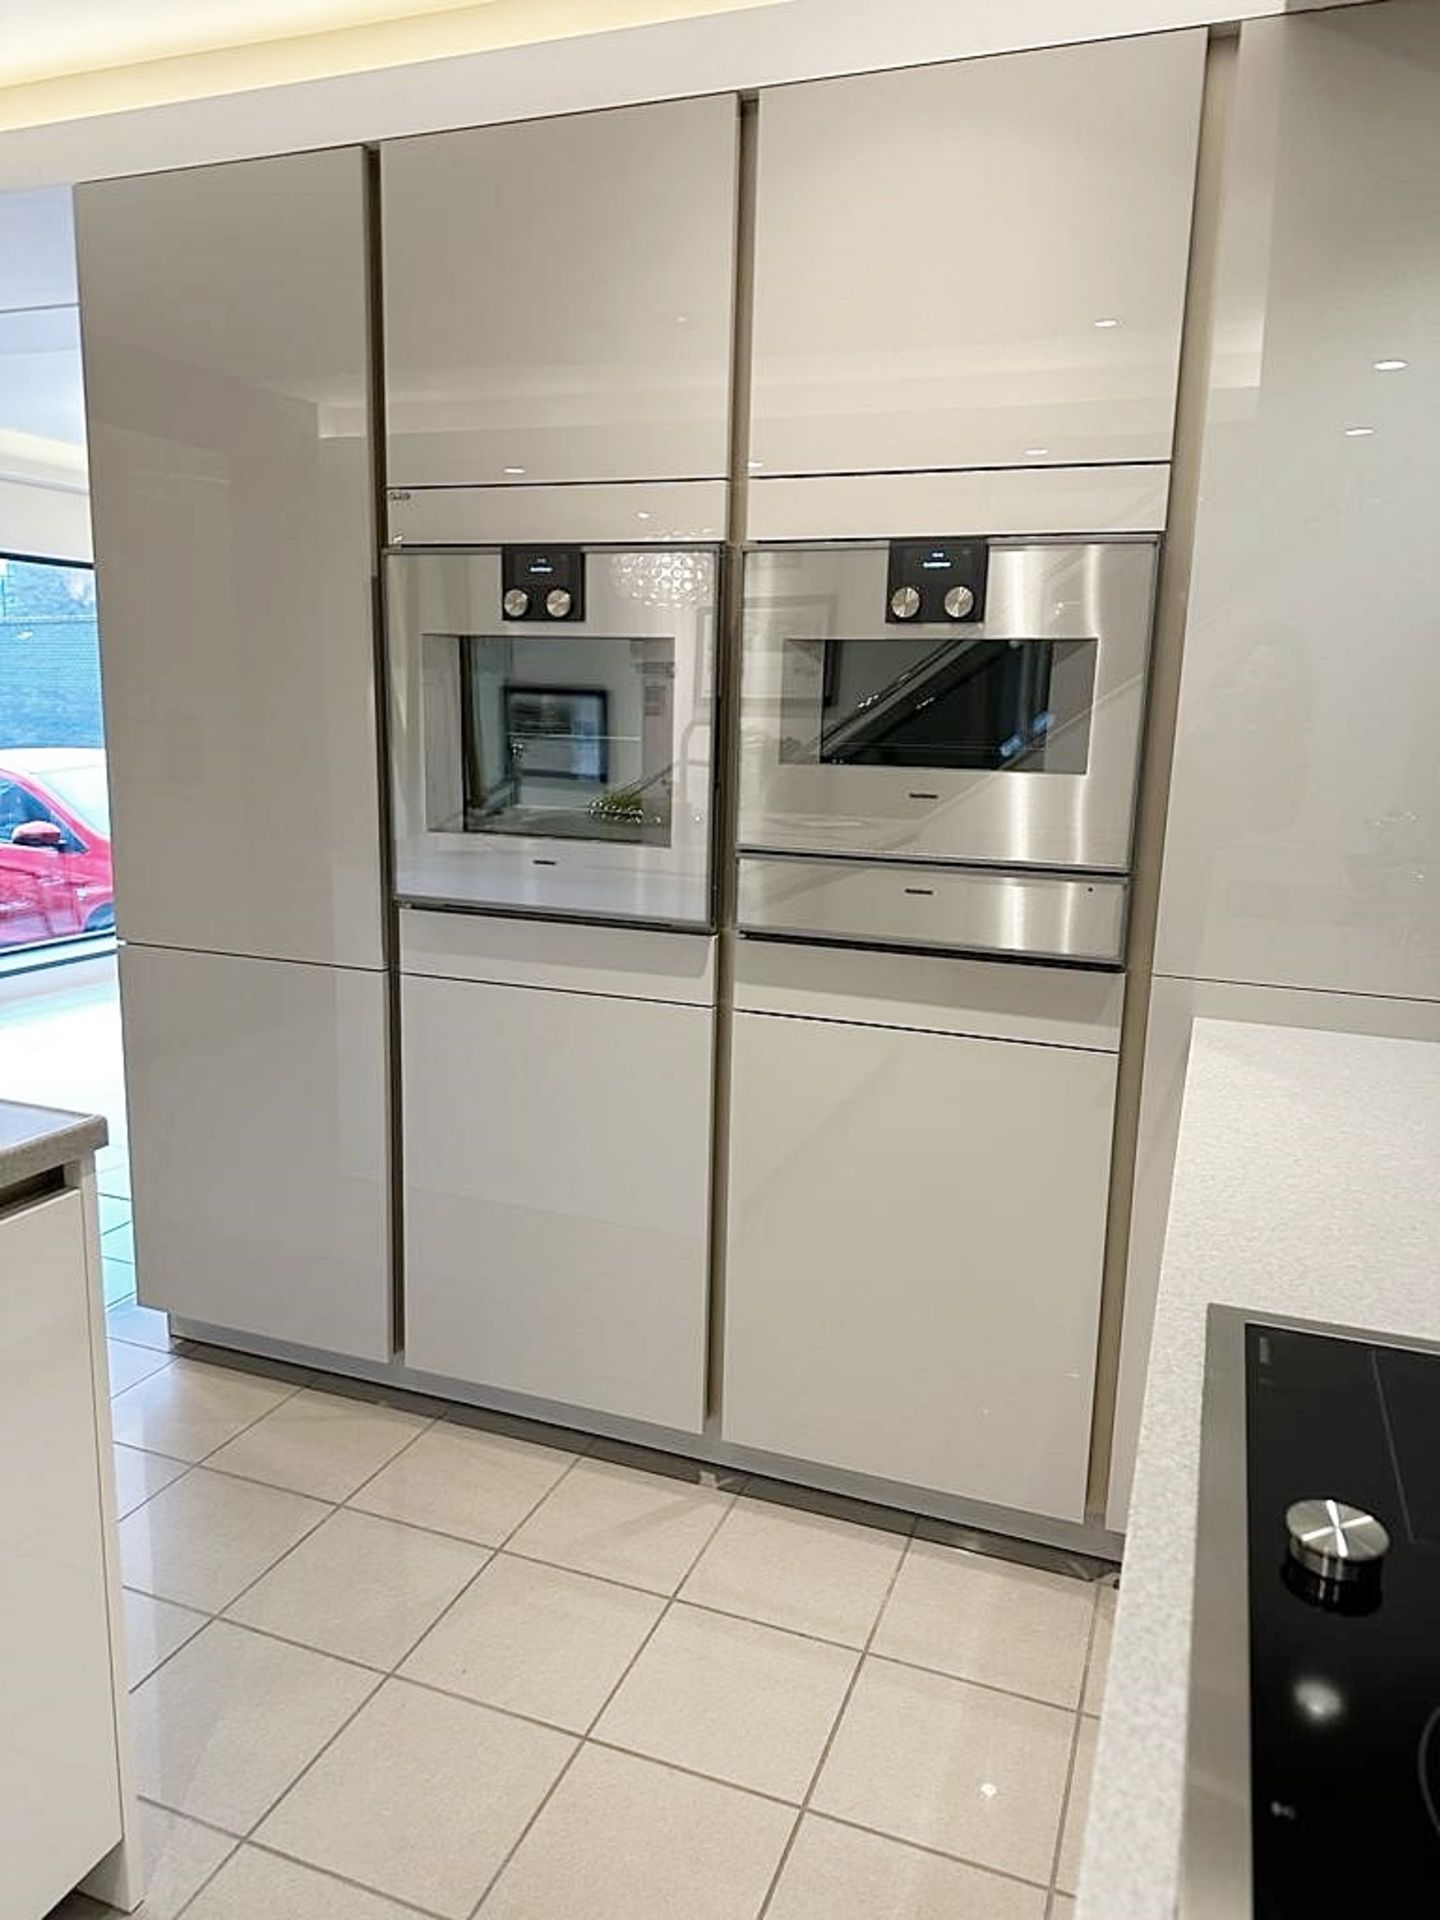 1 x SIEMATIC Contemporary 'S2' Fitted Kitchen In Gloss White And Grey *Ex-Display Showroom Model* - Image 9 of 16